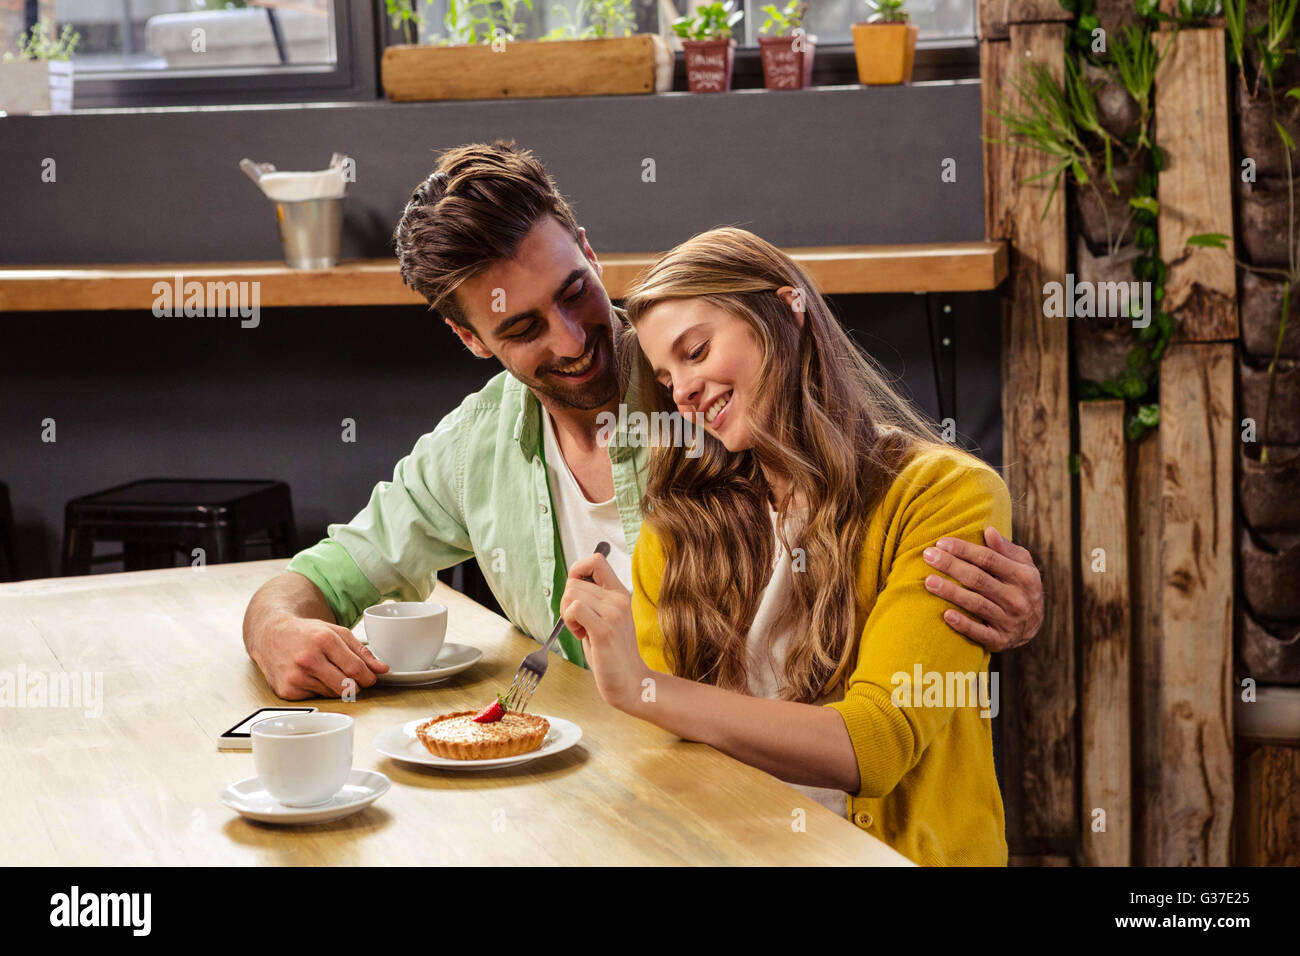 Lovely couple getting a hug Stock Photo